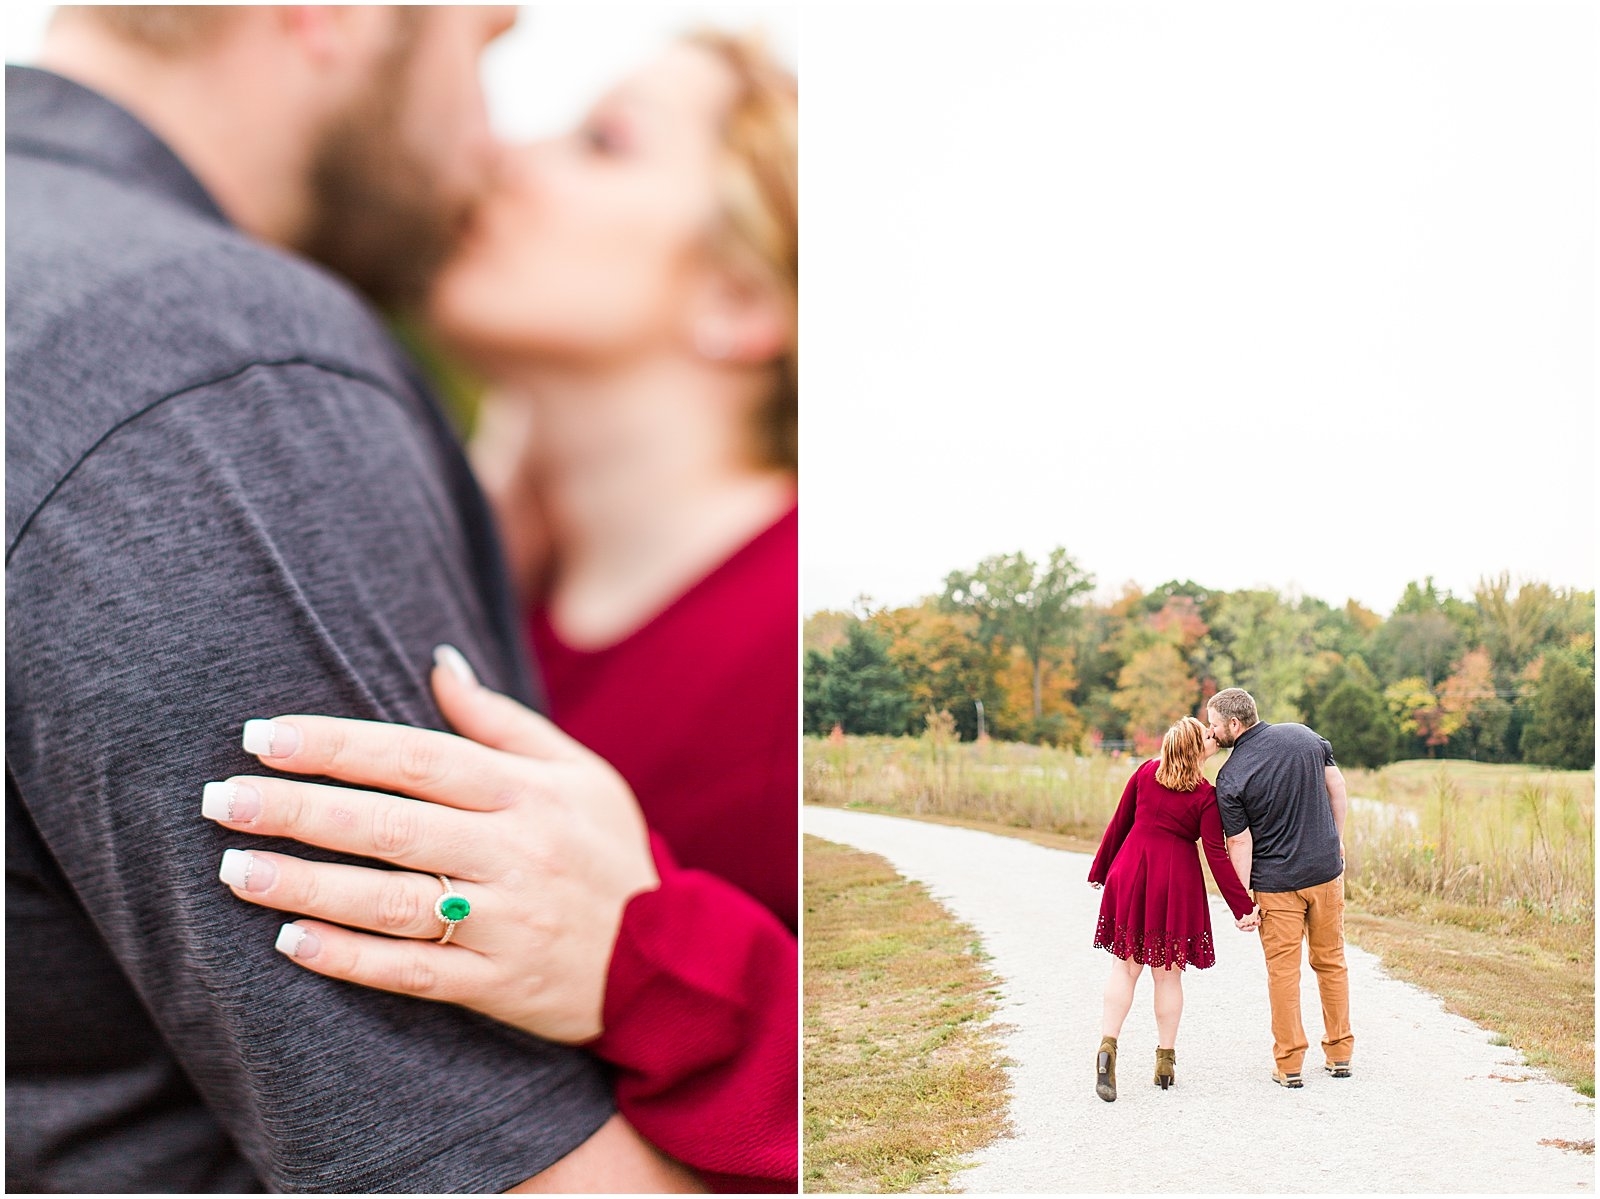 The Best of Engagement Sessions 2020 Recap0019.jpg